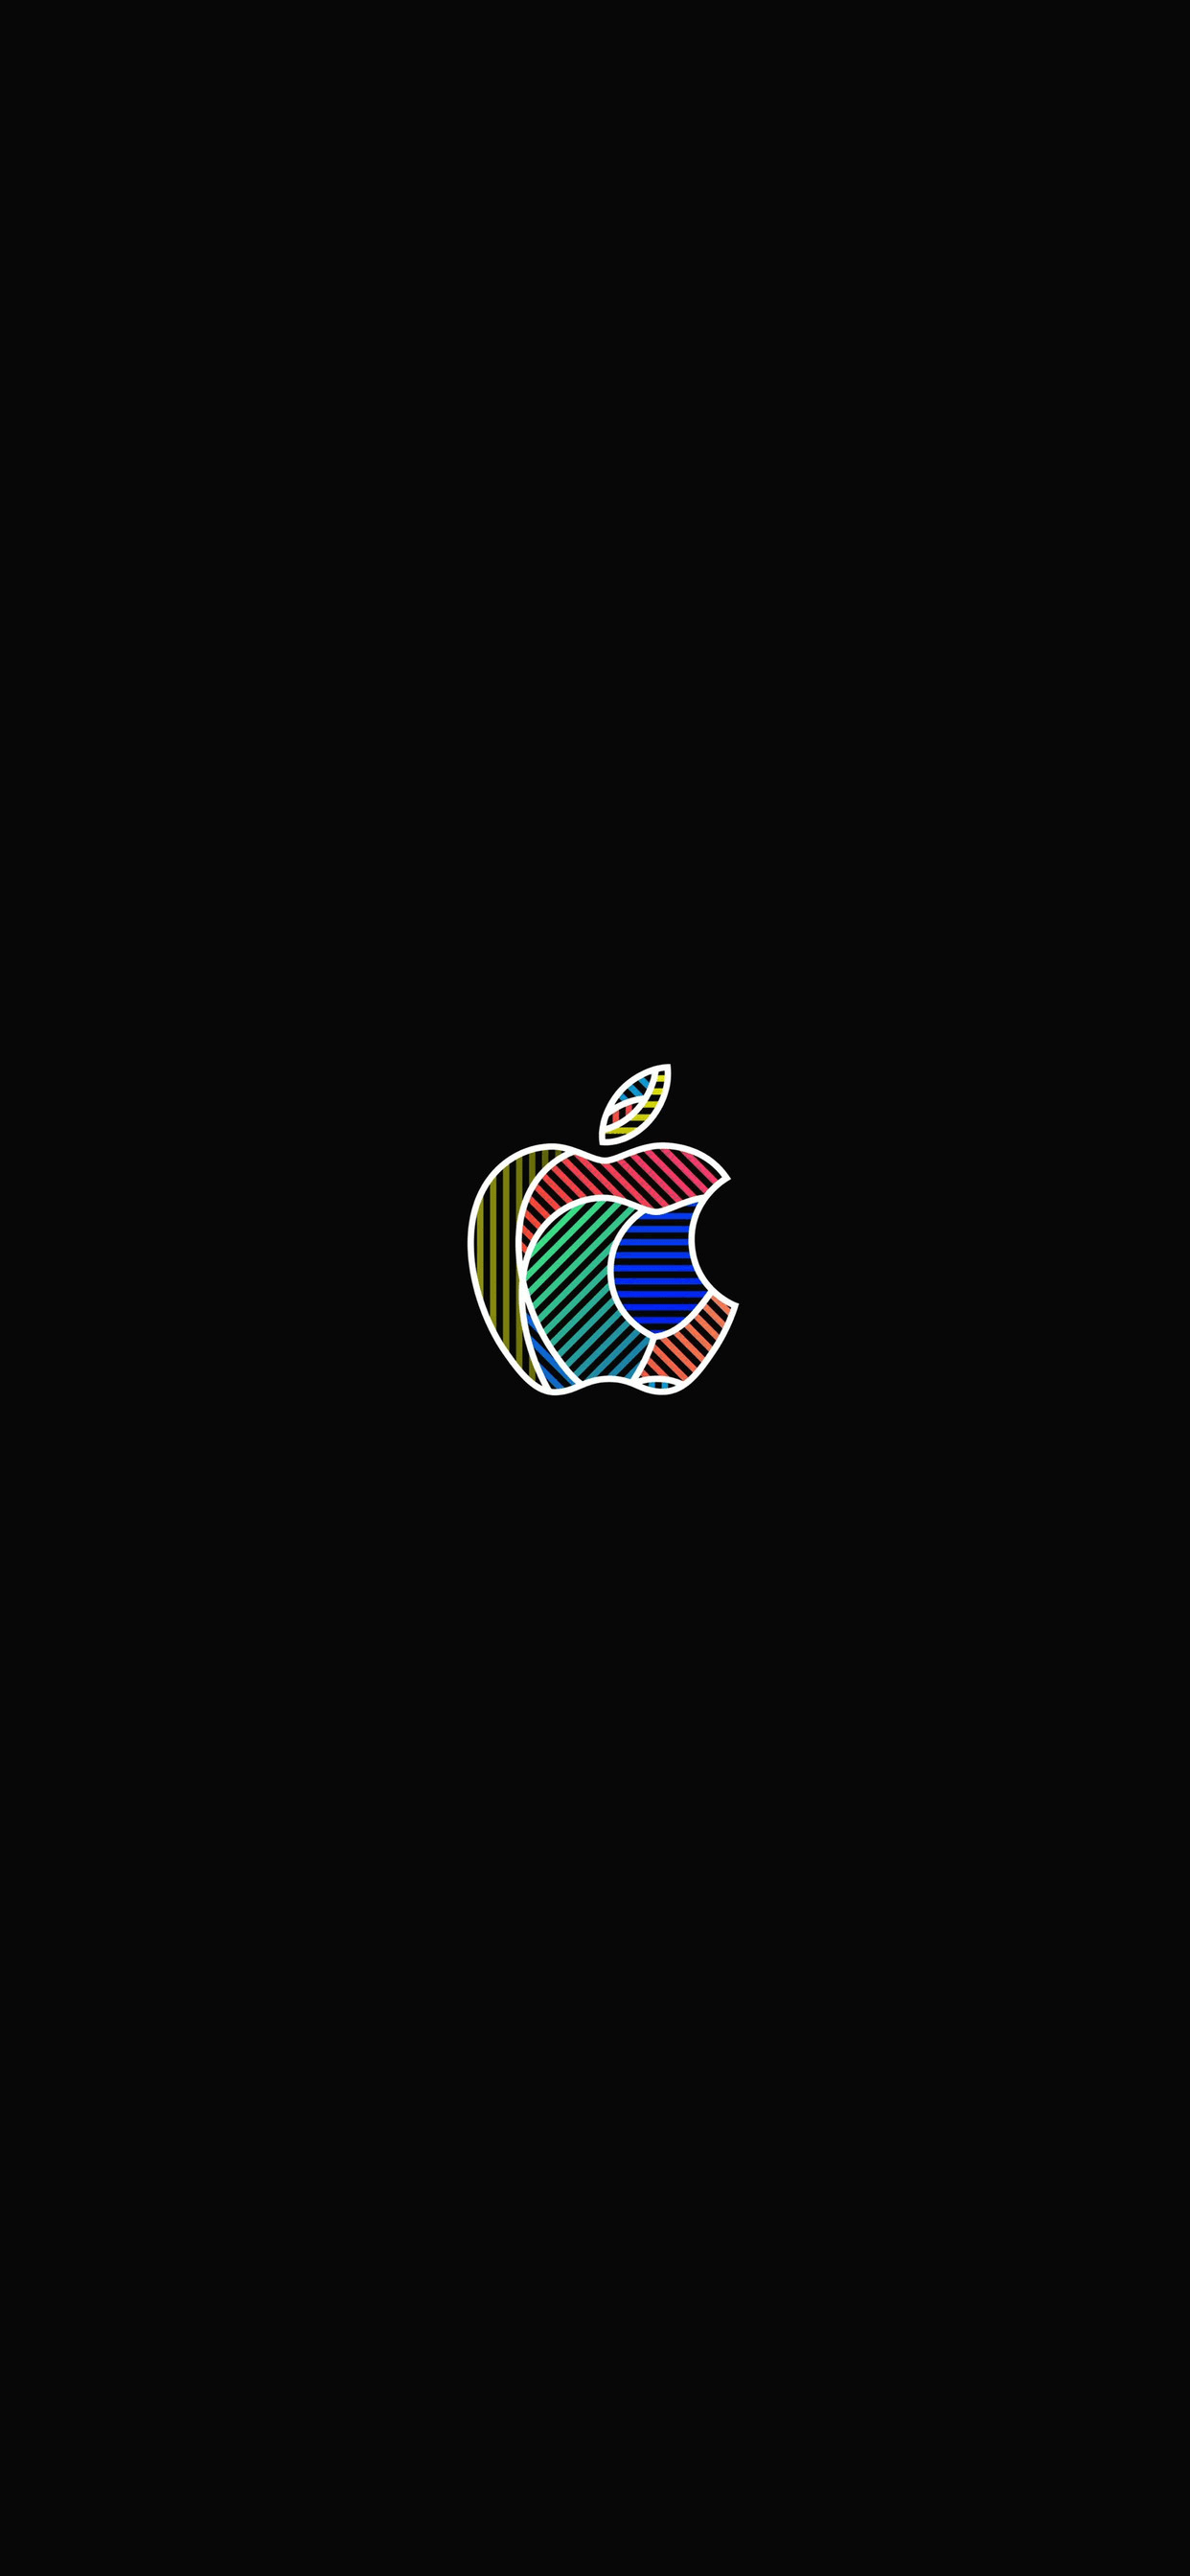 Apple logo Wallpaper for iPhone X, 6 Download